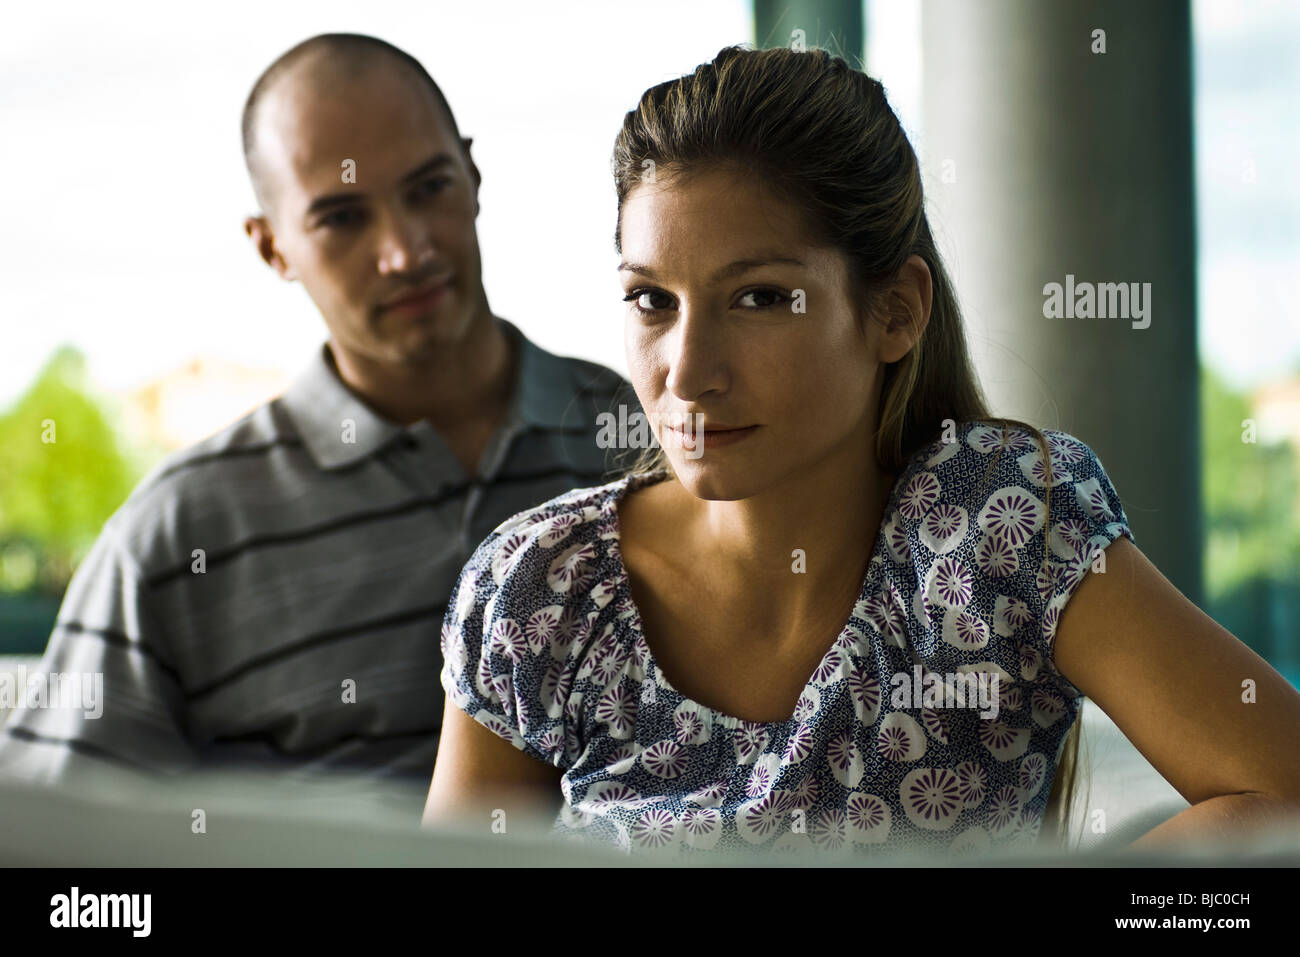 Young woman looking at camera, husband in background Stock Photo